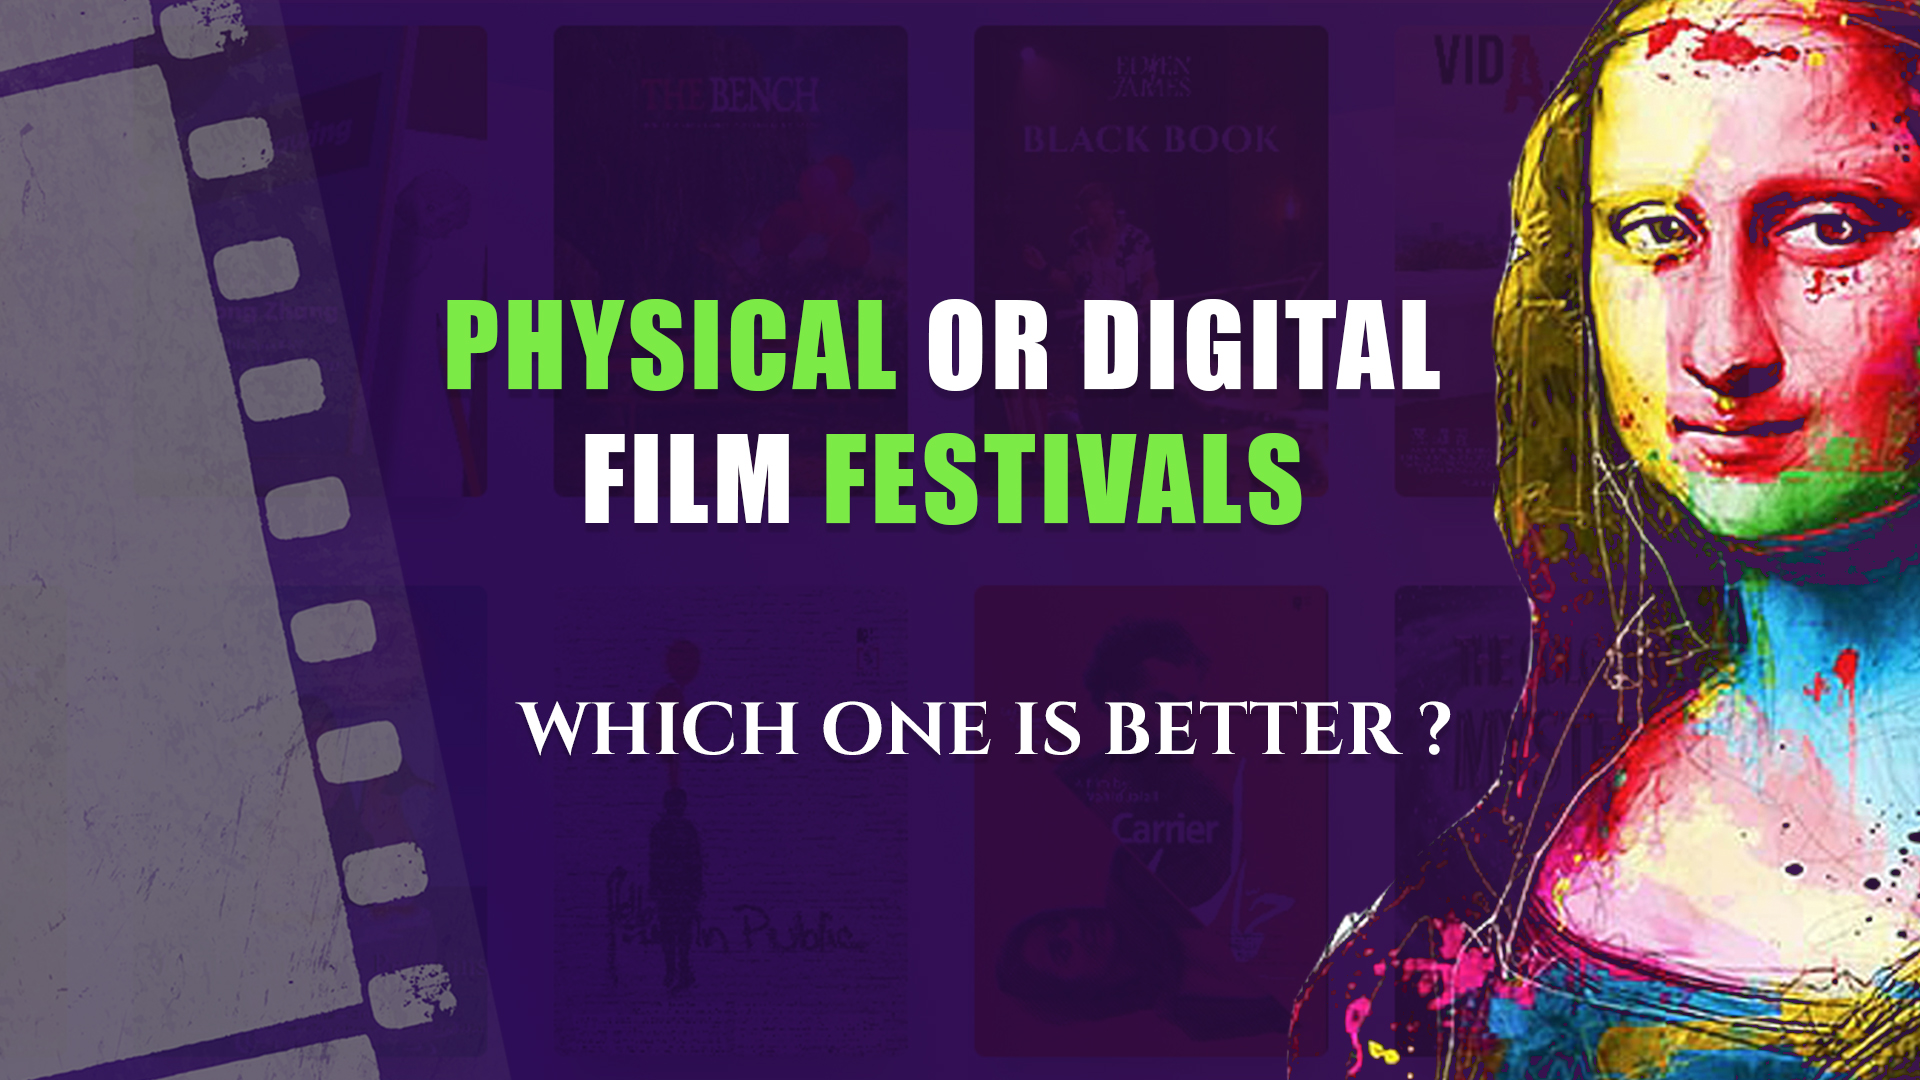 PHYSICAL OR DIGITAL FILM FESTIVALS: WHICH ONE IS BETTER?